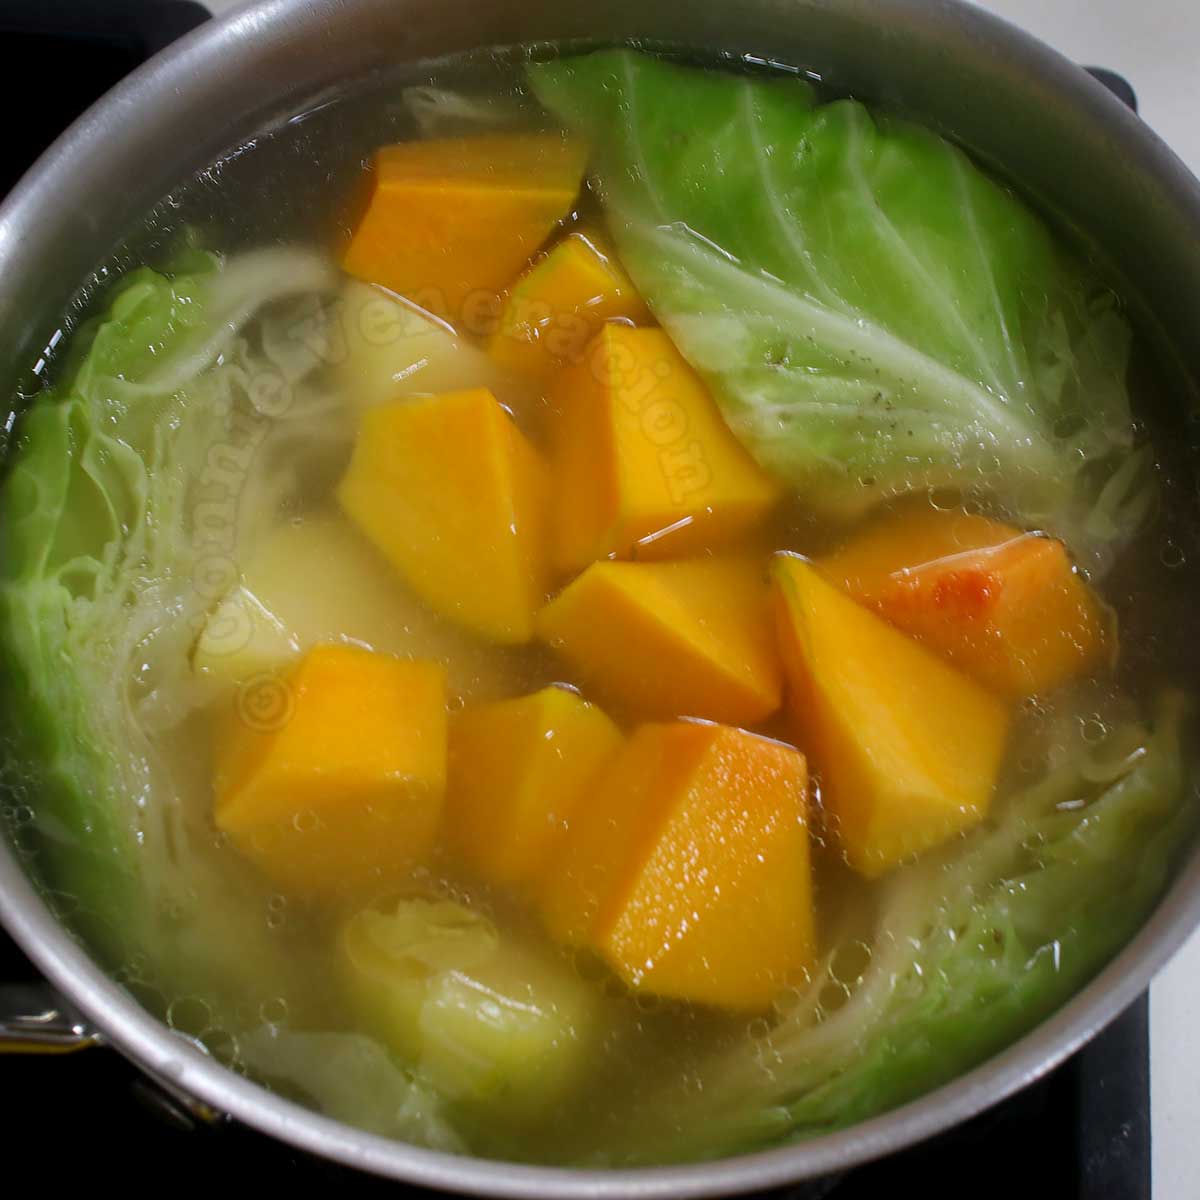 Boiling squash, potatoes and cabbage in chicken broth